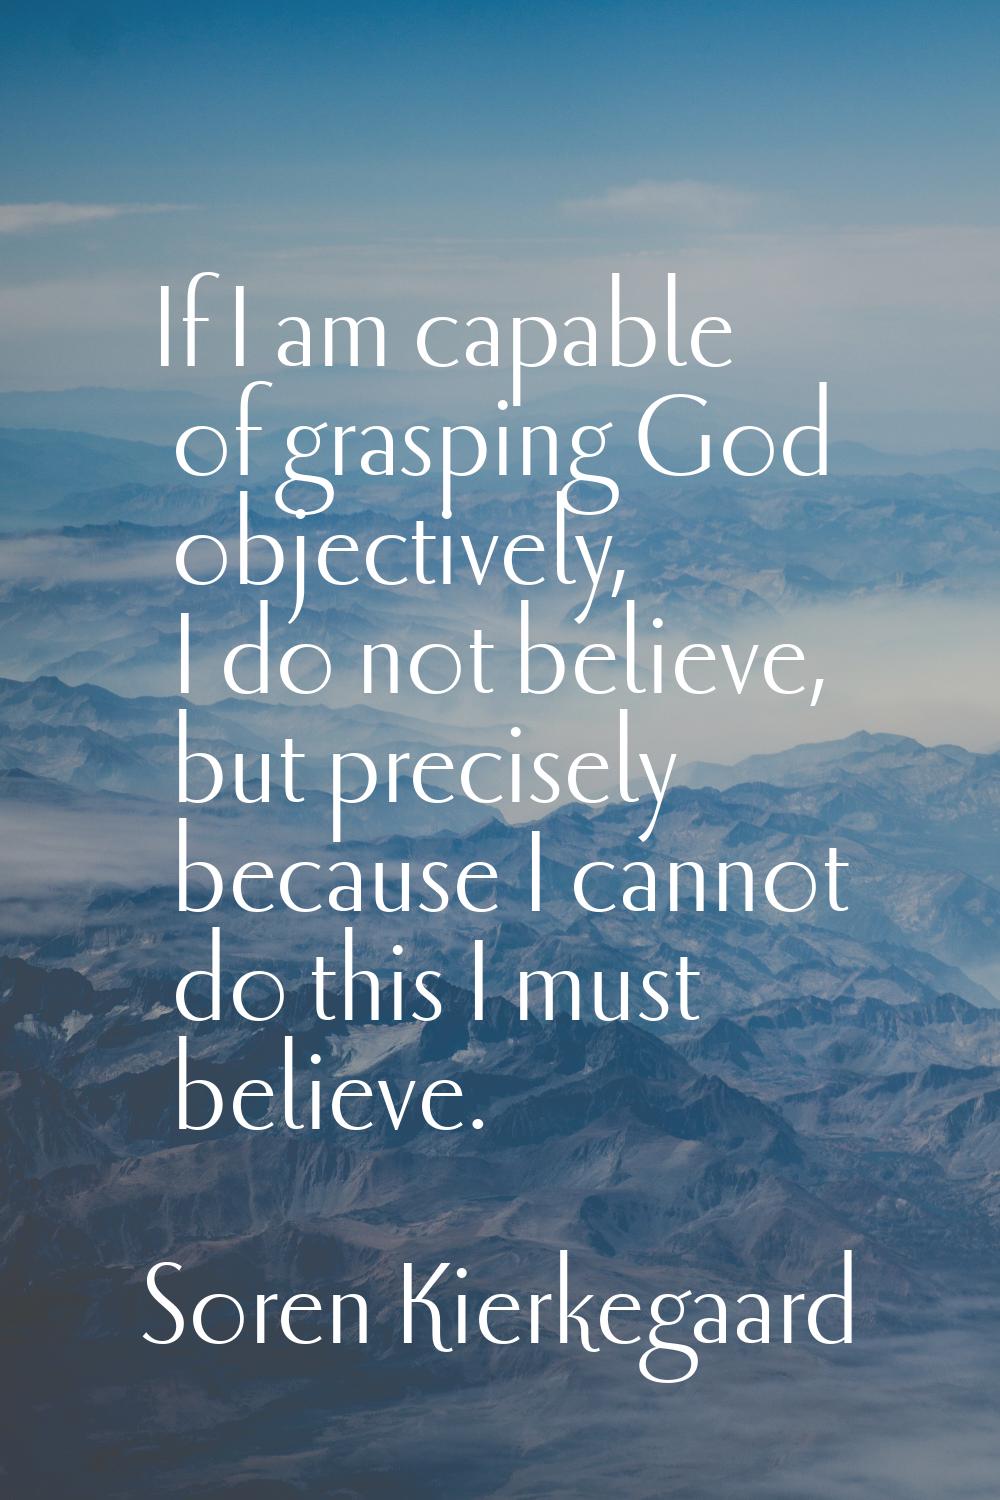 If I am capable of grasping God objectively, I do not believe, but precisely because I cannot do th